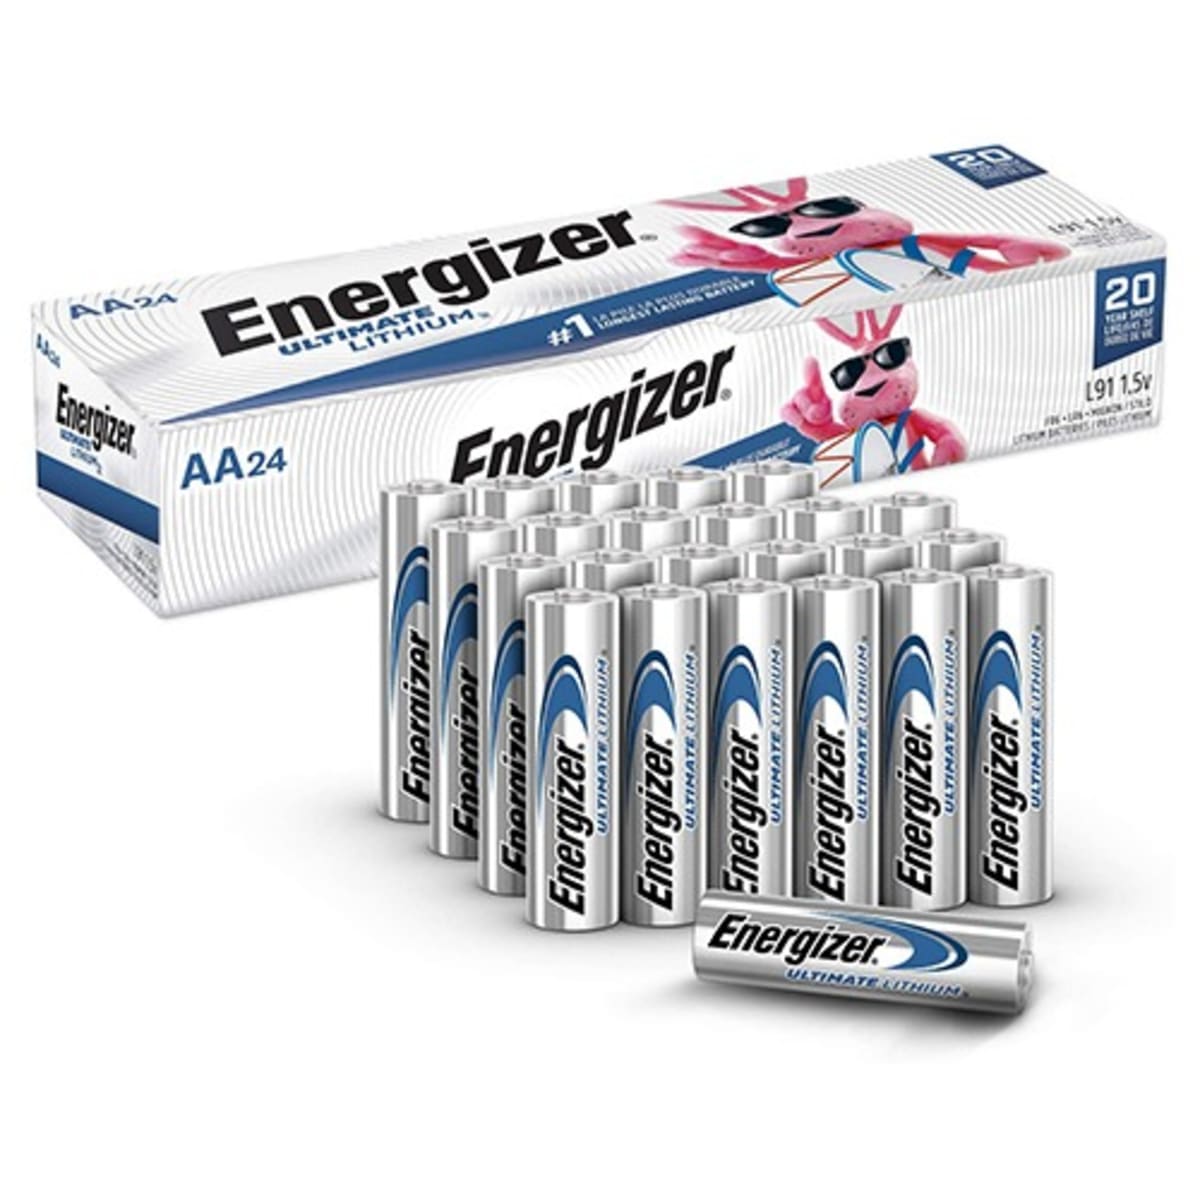 BATTERY LITHIUM ENERGIZER AA